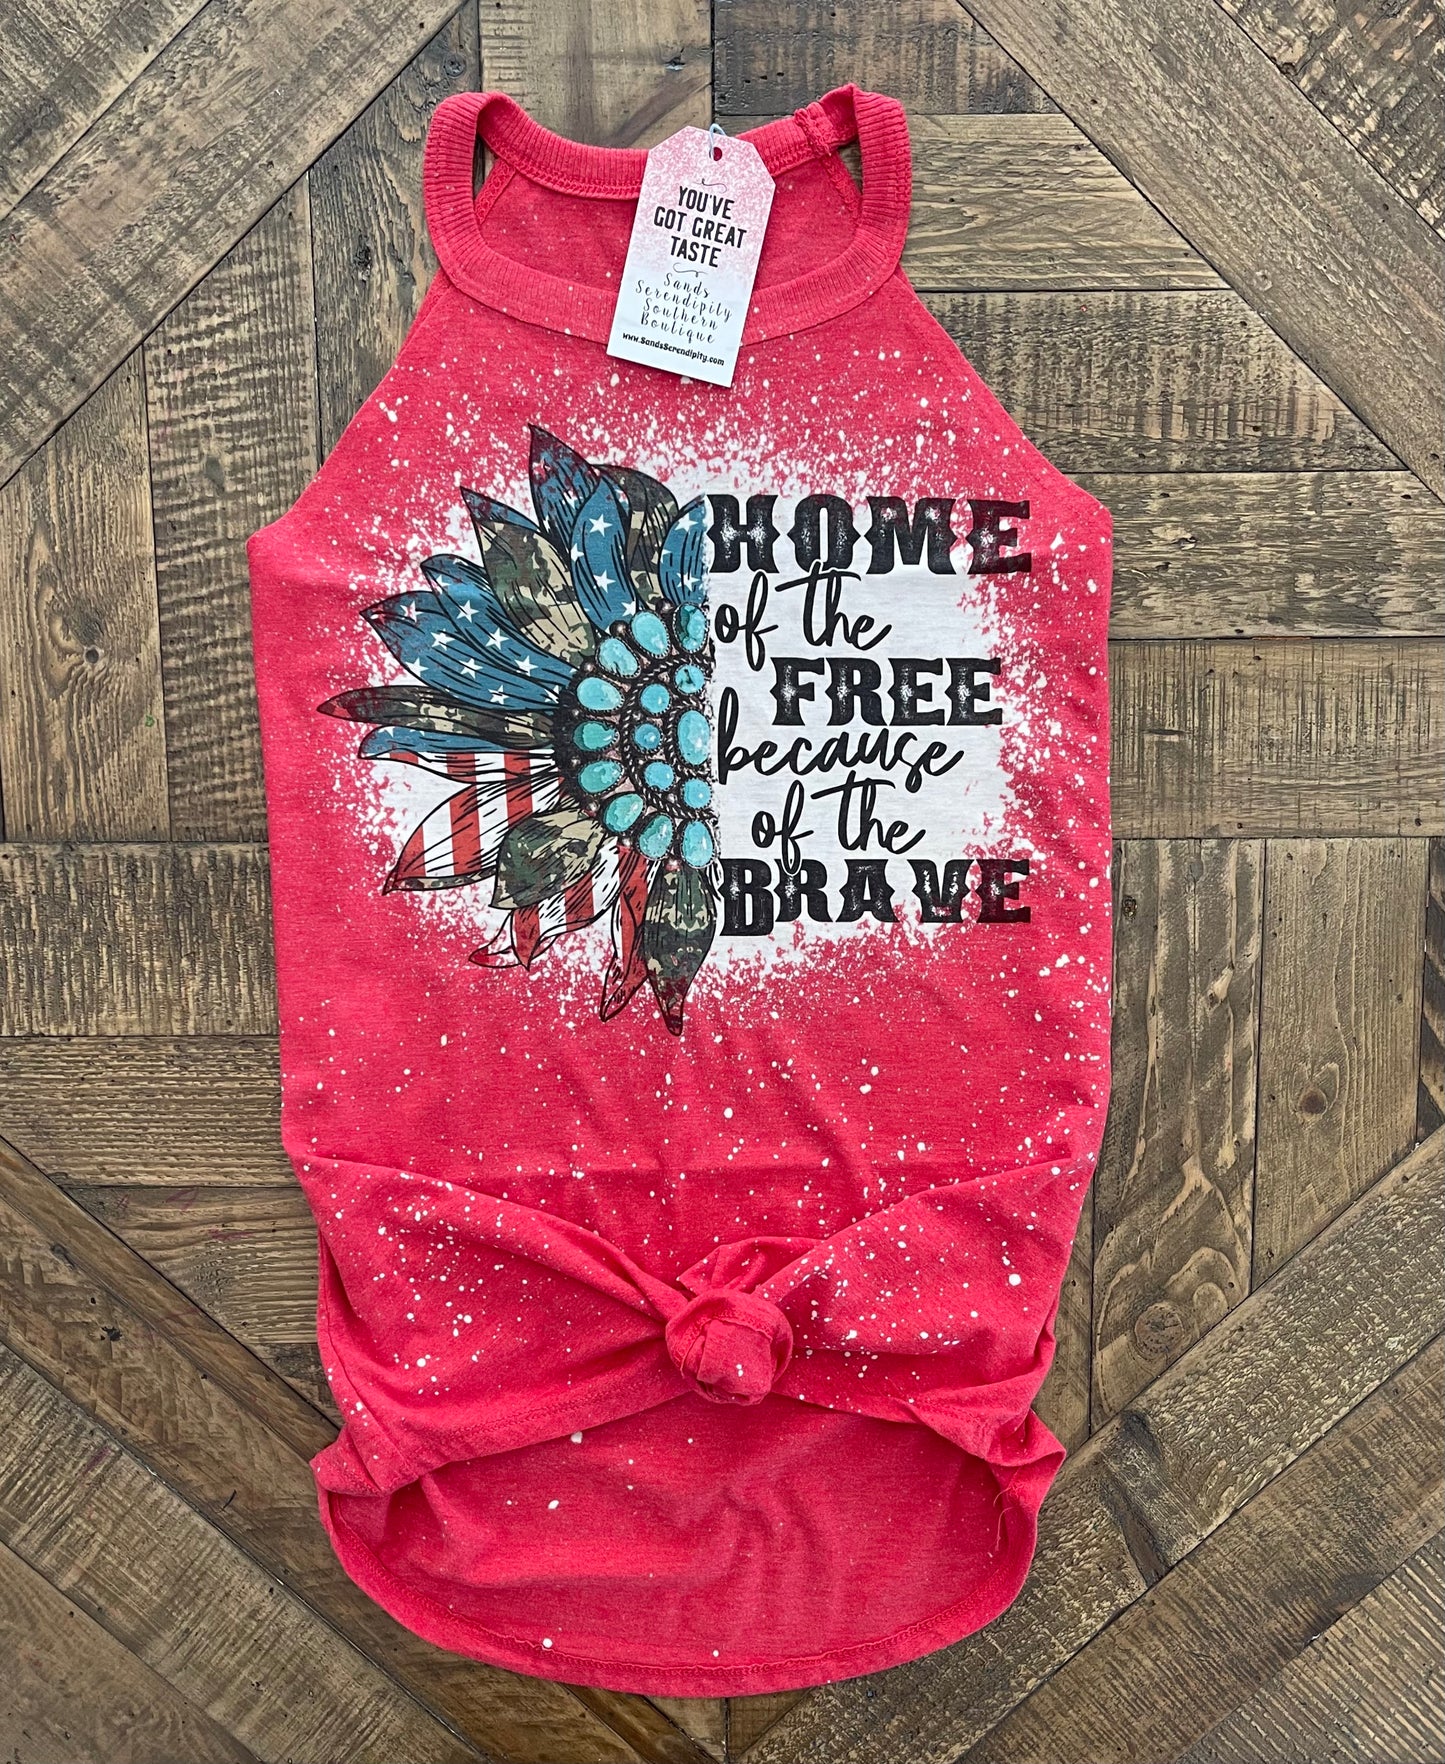 Home Of The Free Because Of The Brave 🇺🇸 - Sands Serendipity Boutique